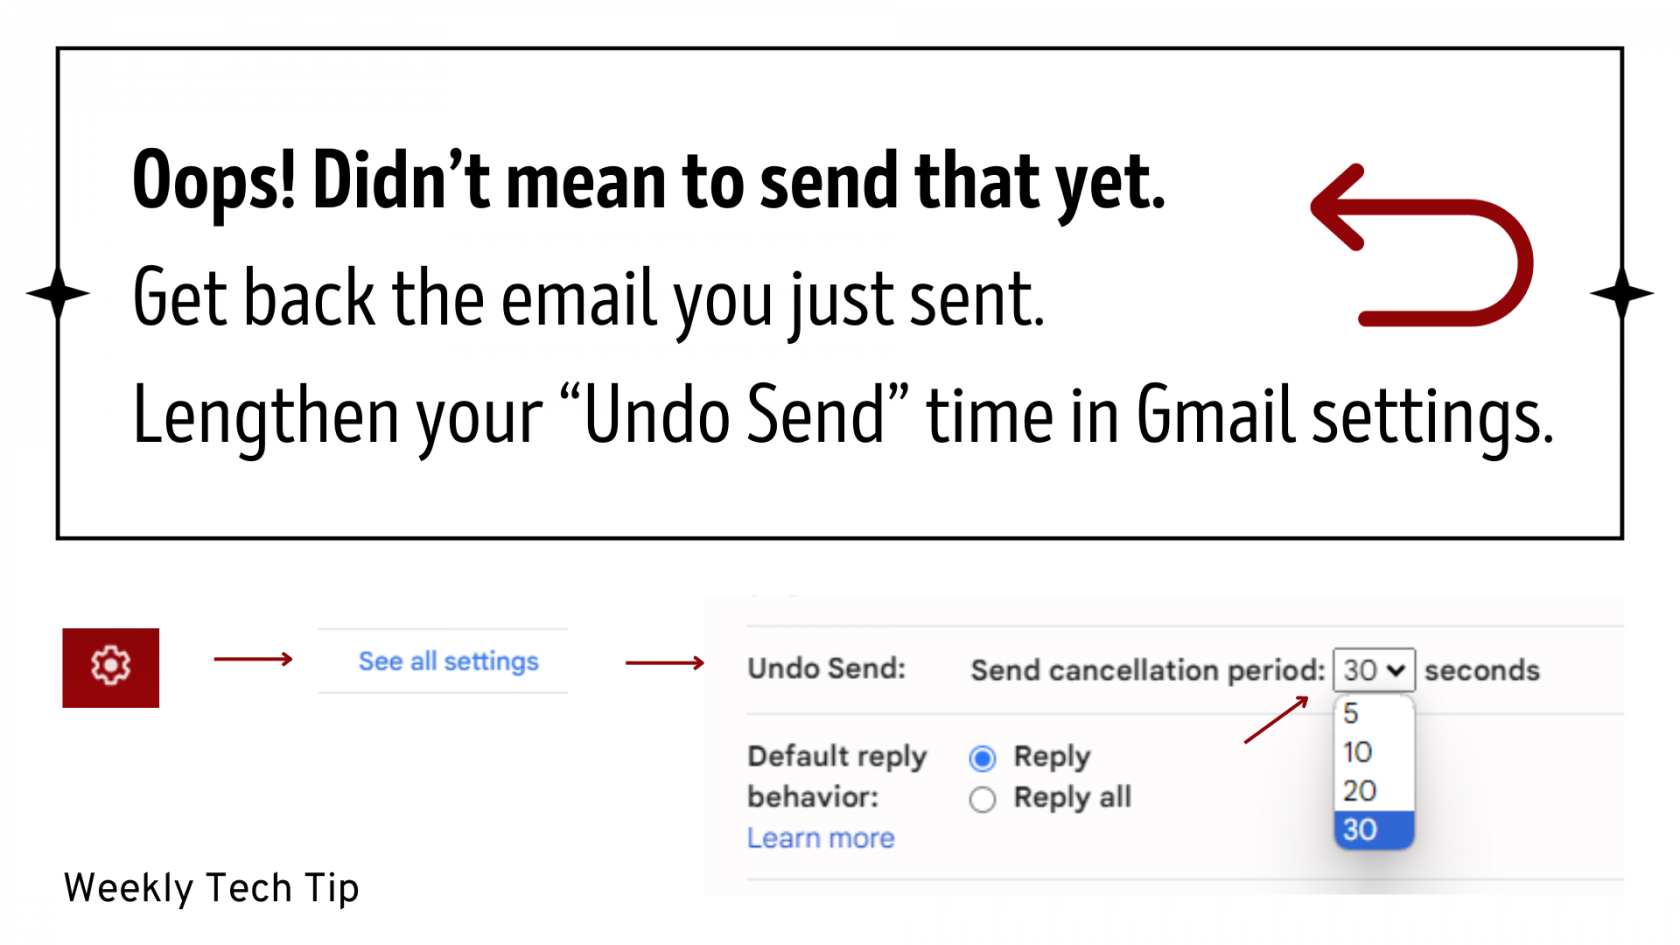 Change-undo-send-time.png